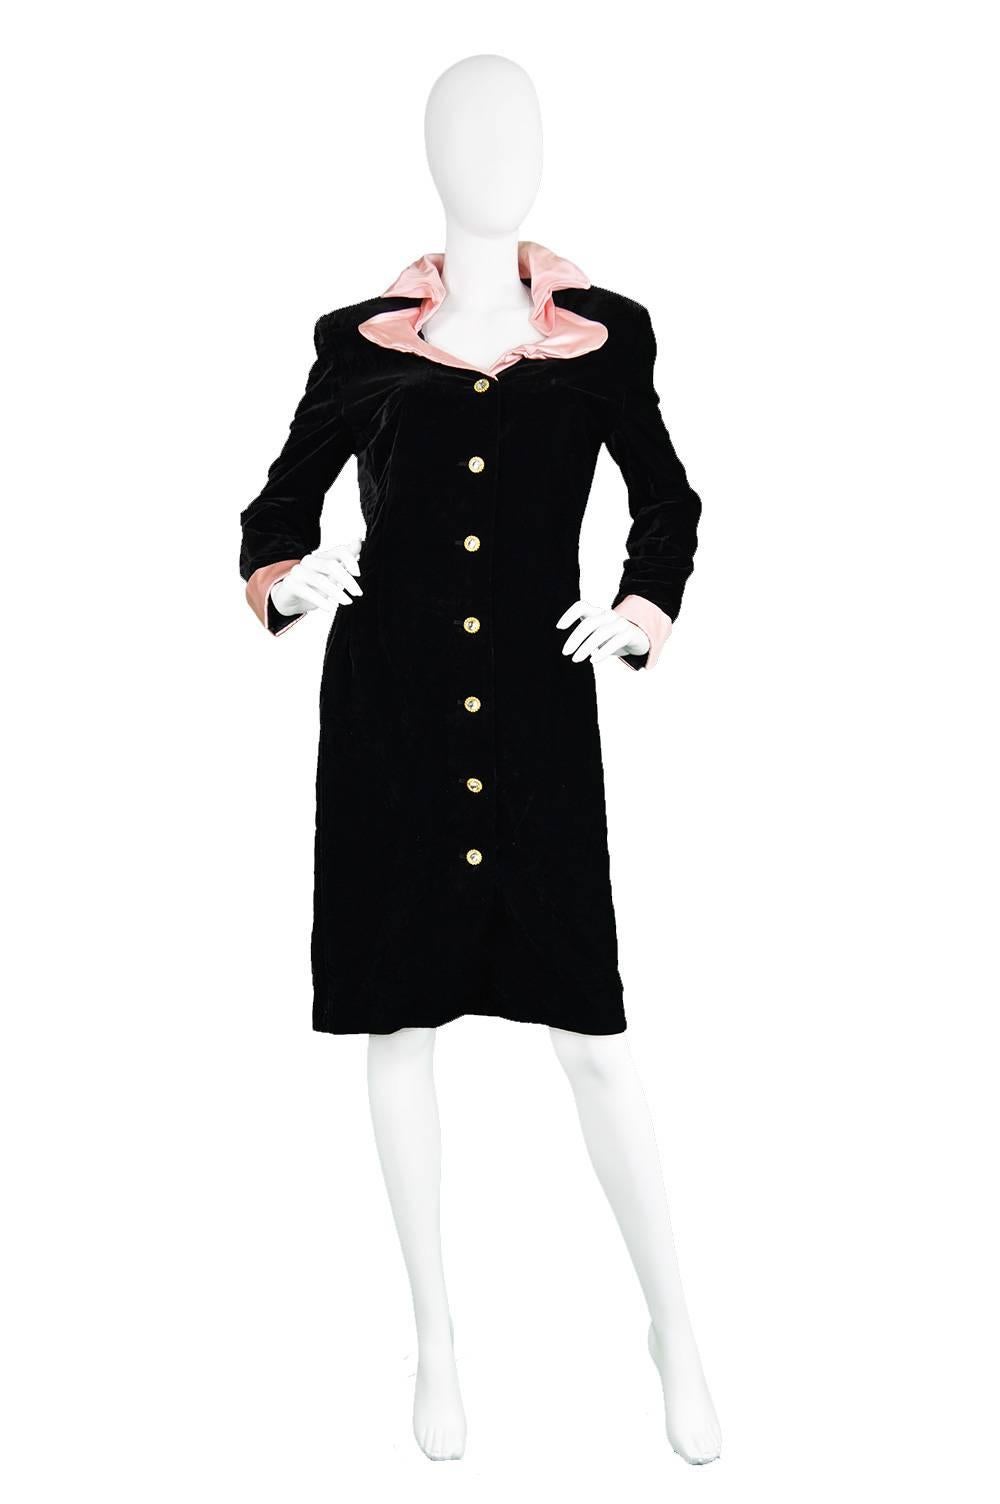 A striking and luxurious vintage coat dress from the 1980s by German luxury designer, Escada. In an inky black soft rayon velvet and the most incredible pink silk satin collar, which is wired so you can mould it and create avant garde architectural